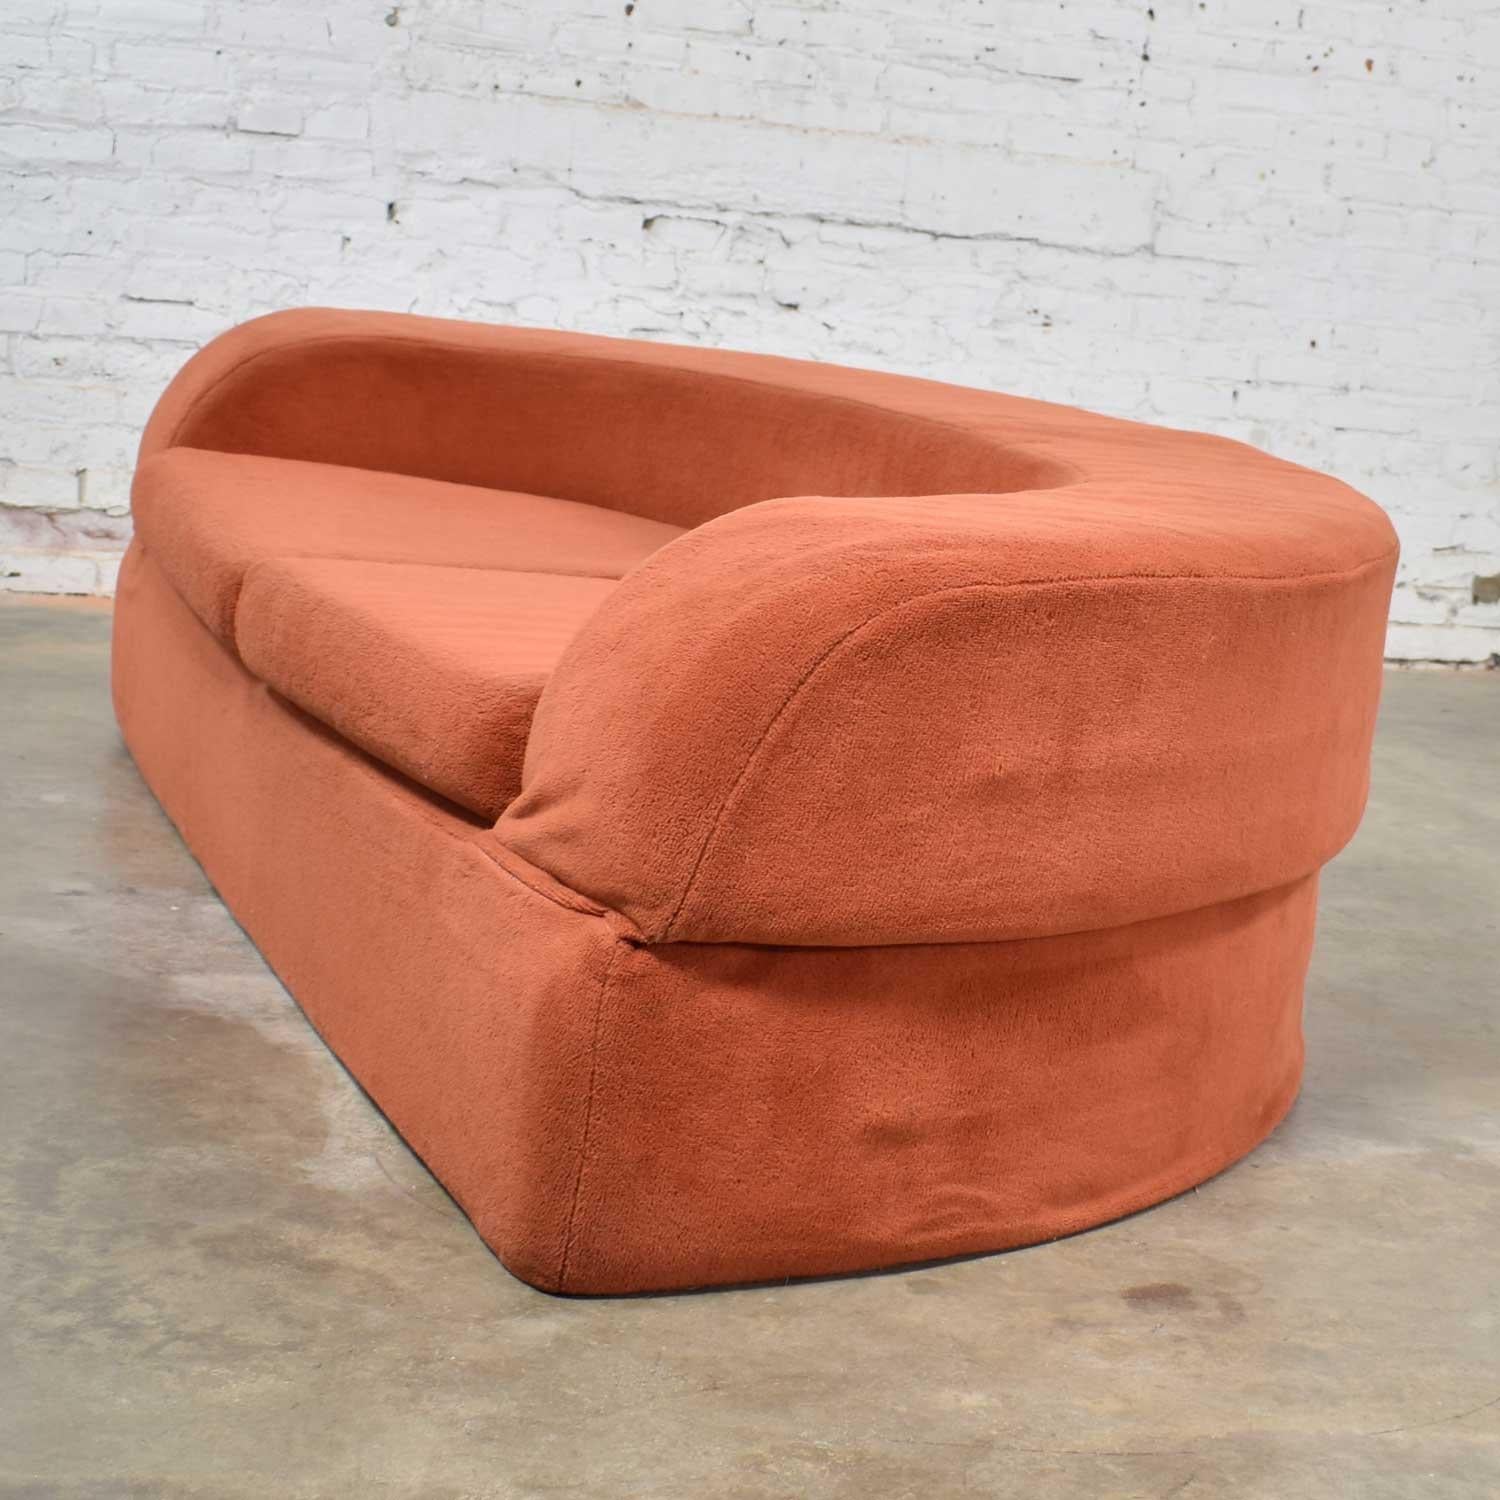 20th Century Mod Round Sleeper Sofa with Ottomans in Orange Fuzzy Fabric by Spherical Furn